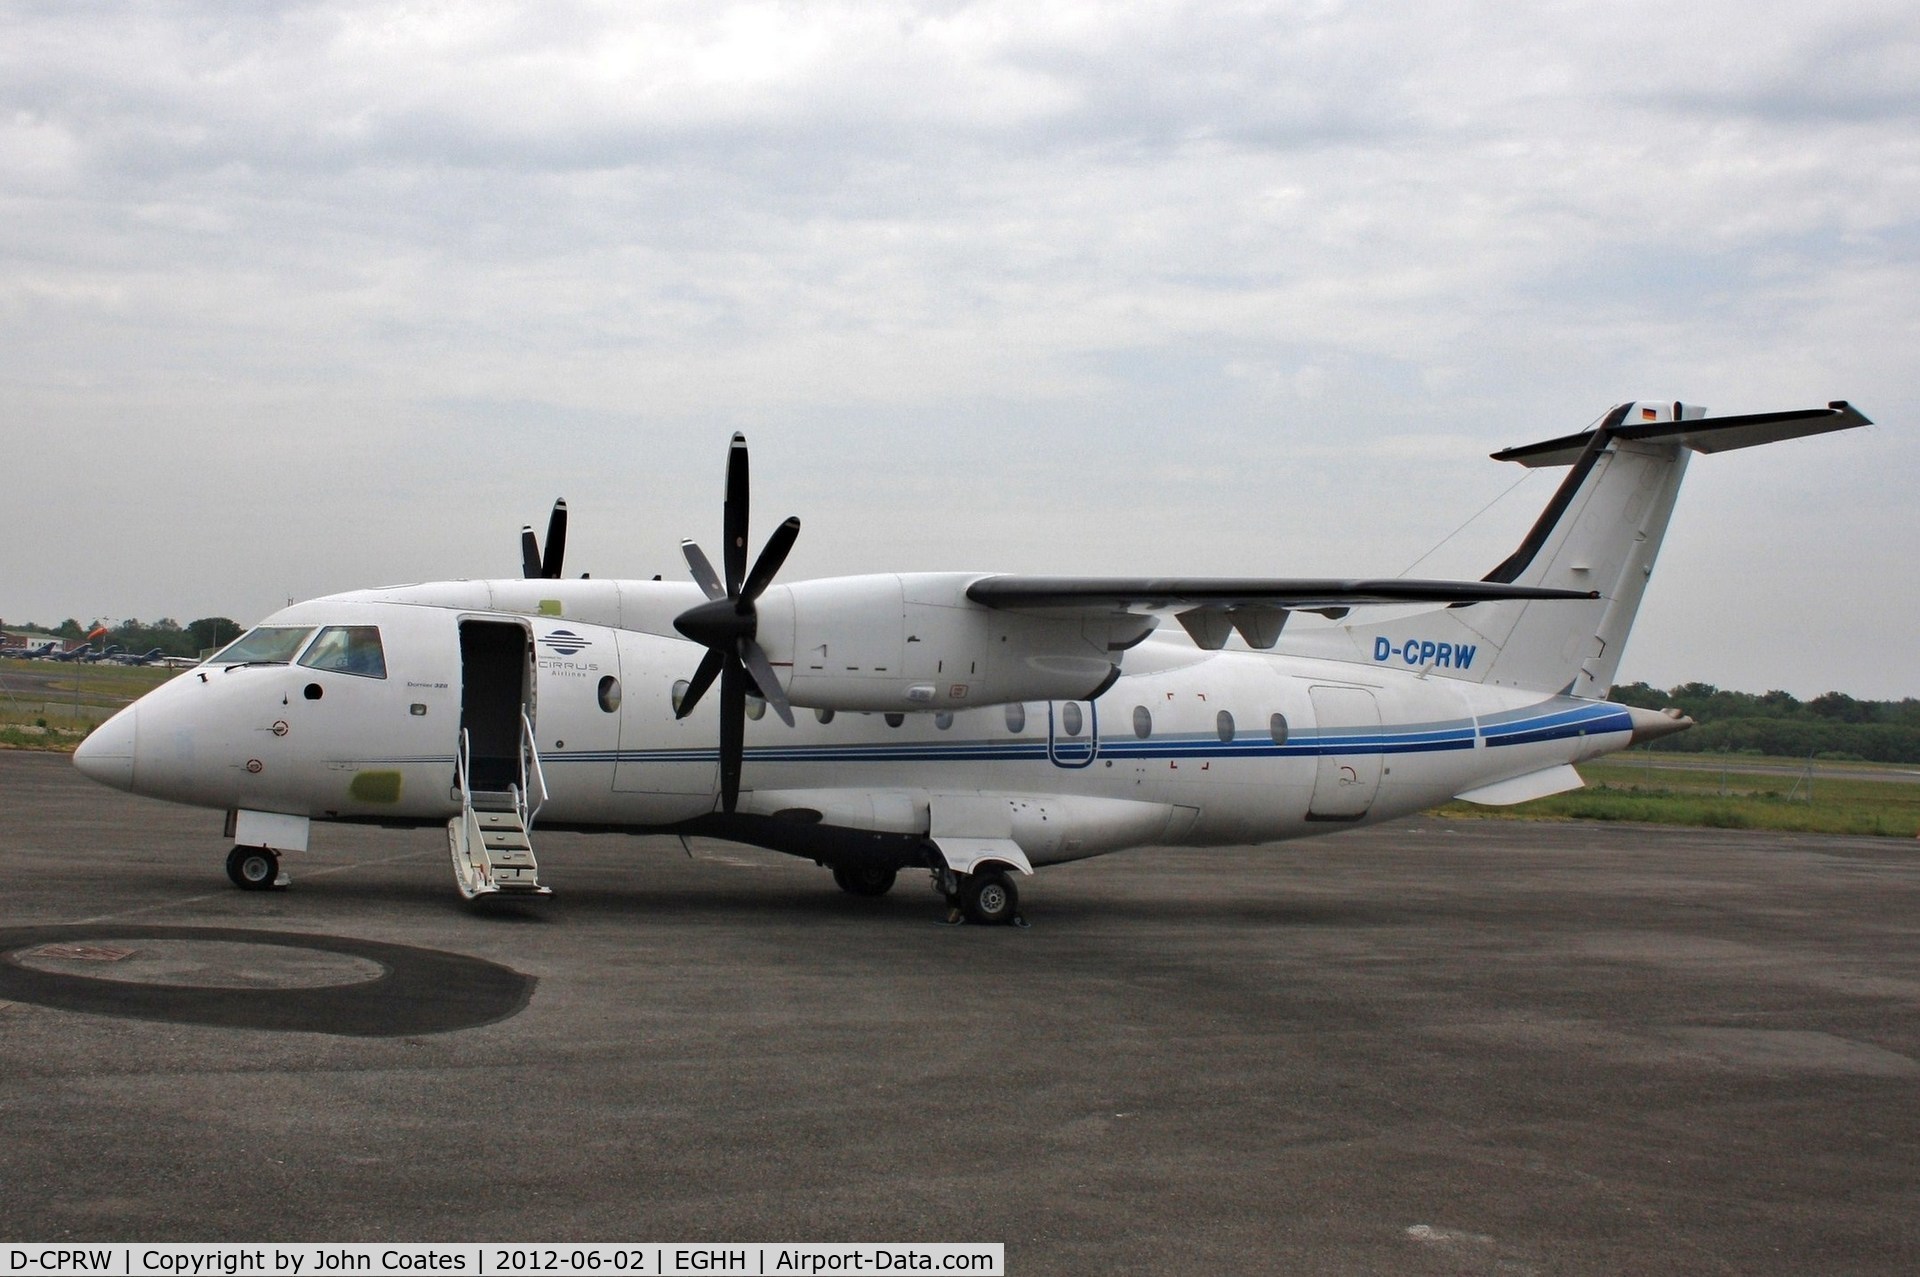 D-CPRW, 1998 Dornier 328-110 C/N 3097, ex Cirrus Airlines for Sierra Nevada Corp and USAF.